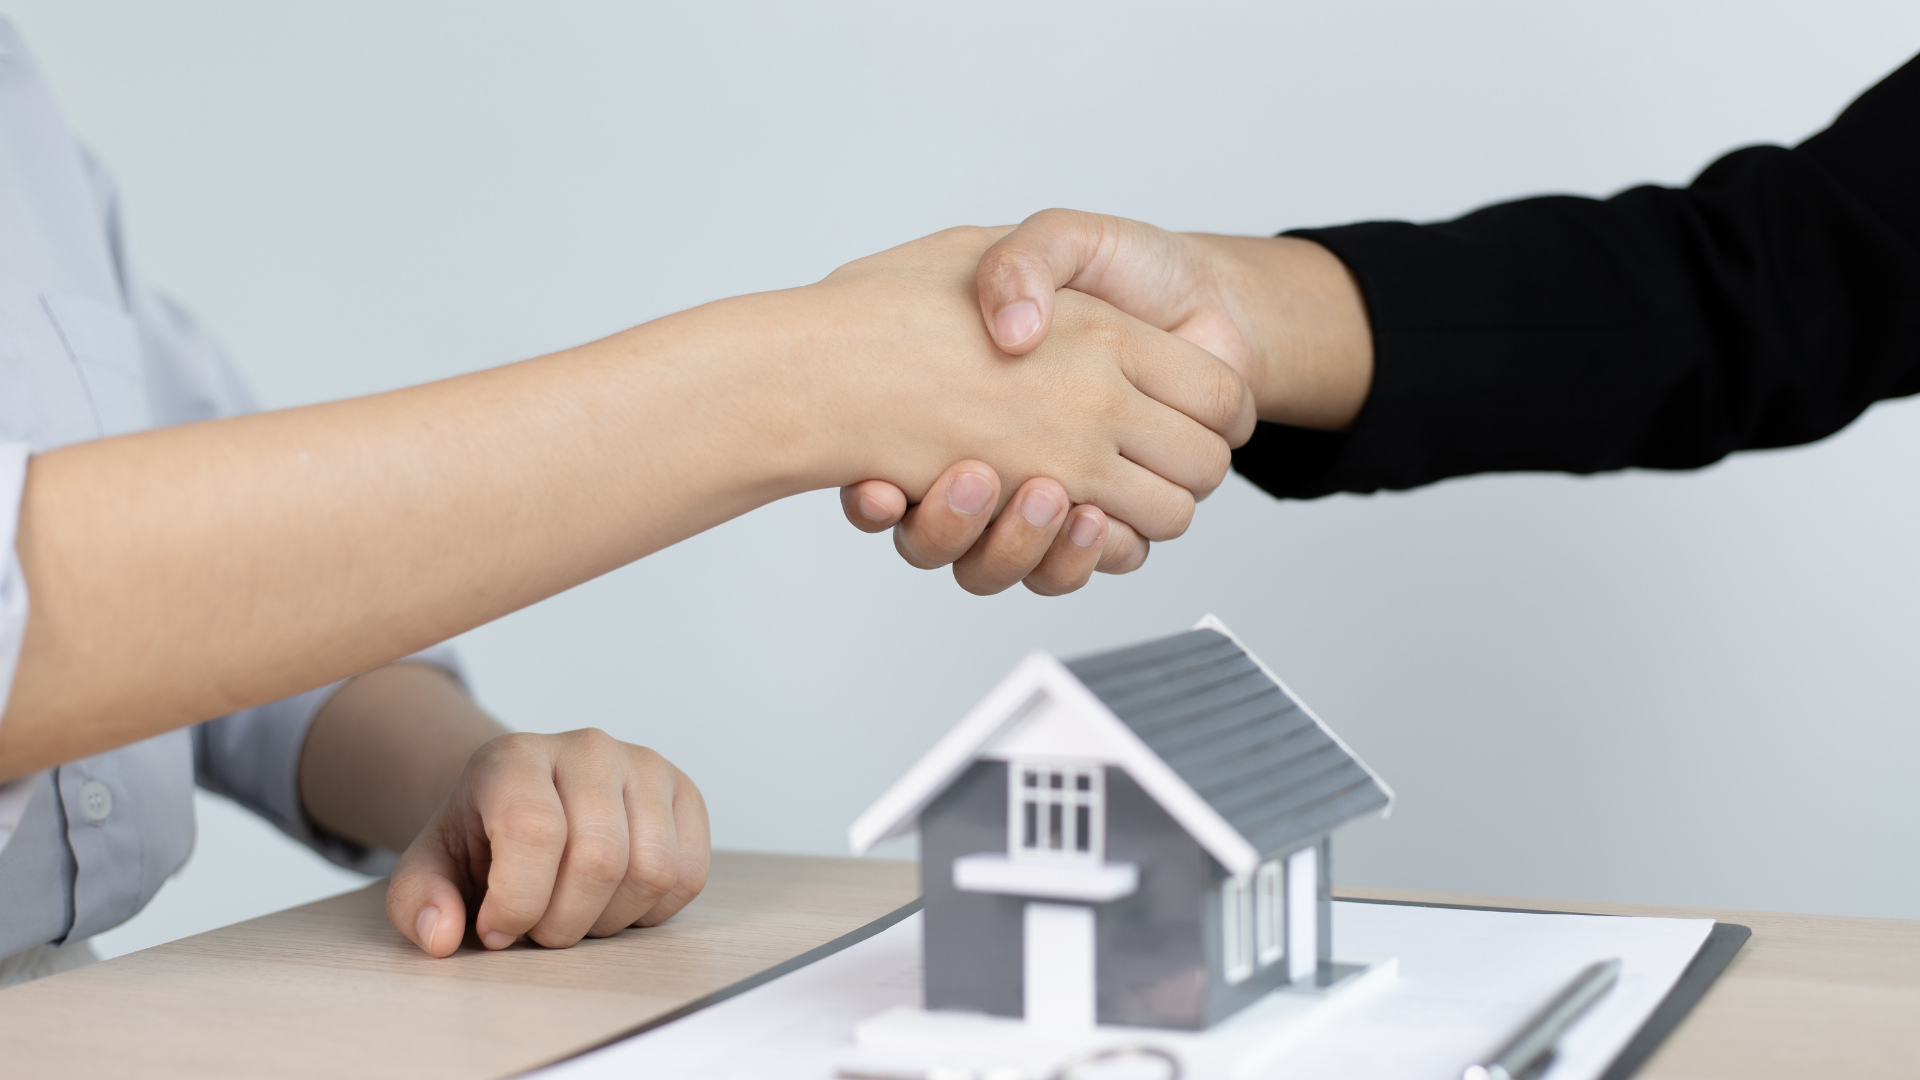 two people shaking hands over a model of a house